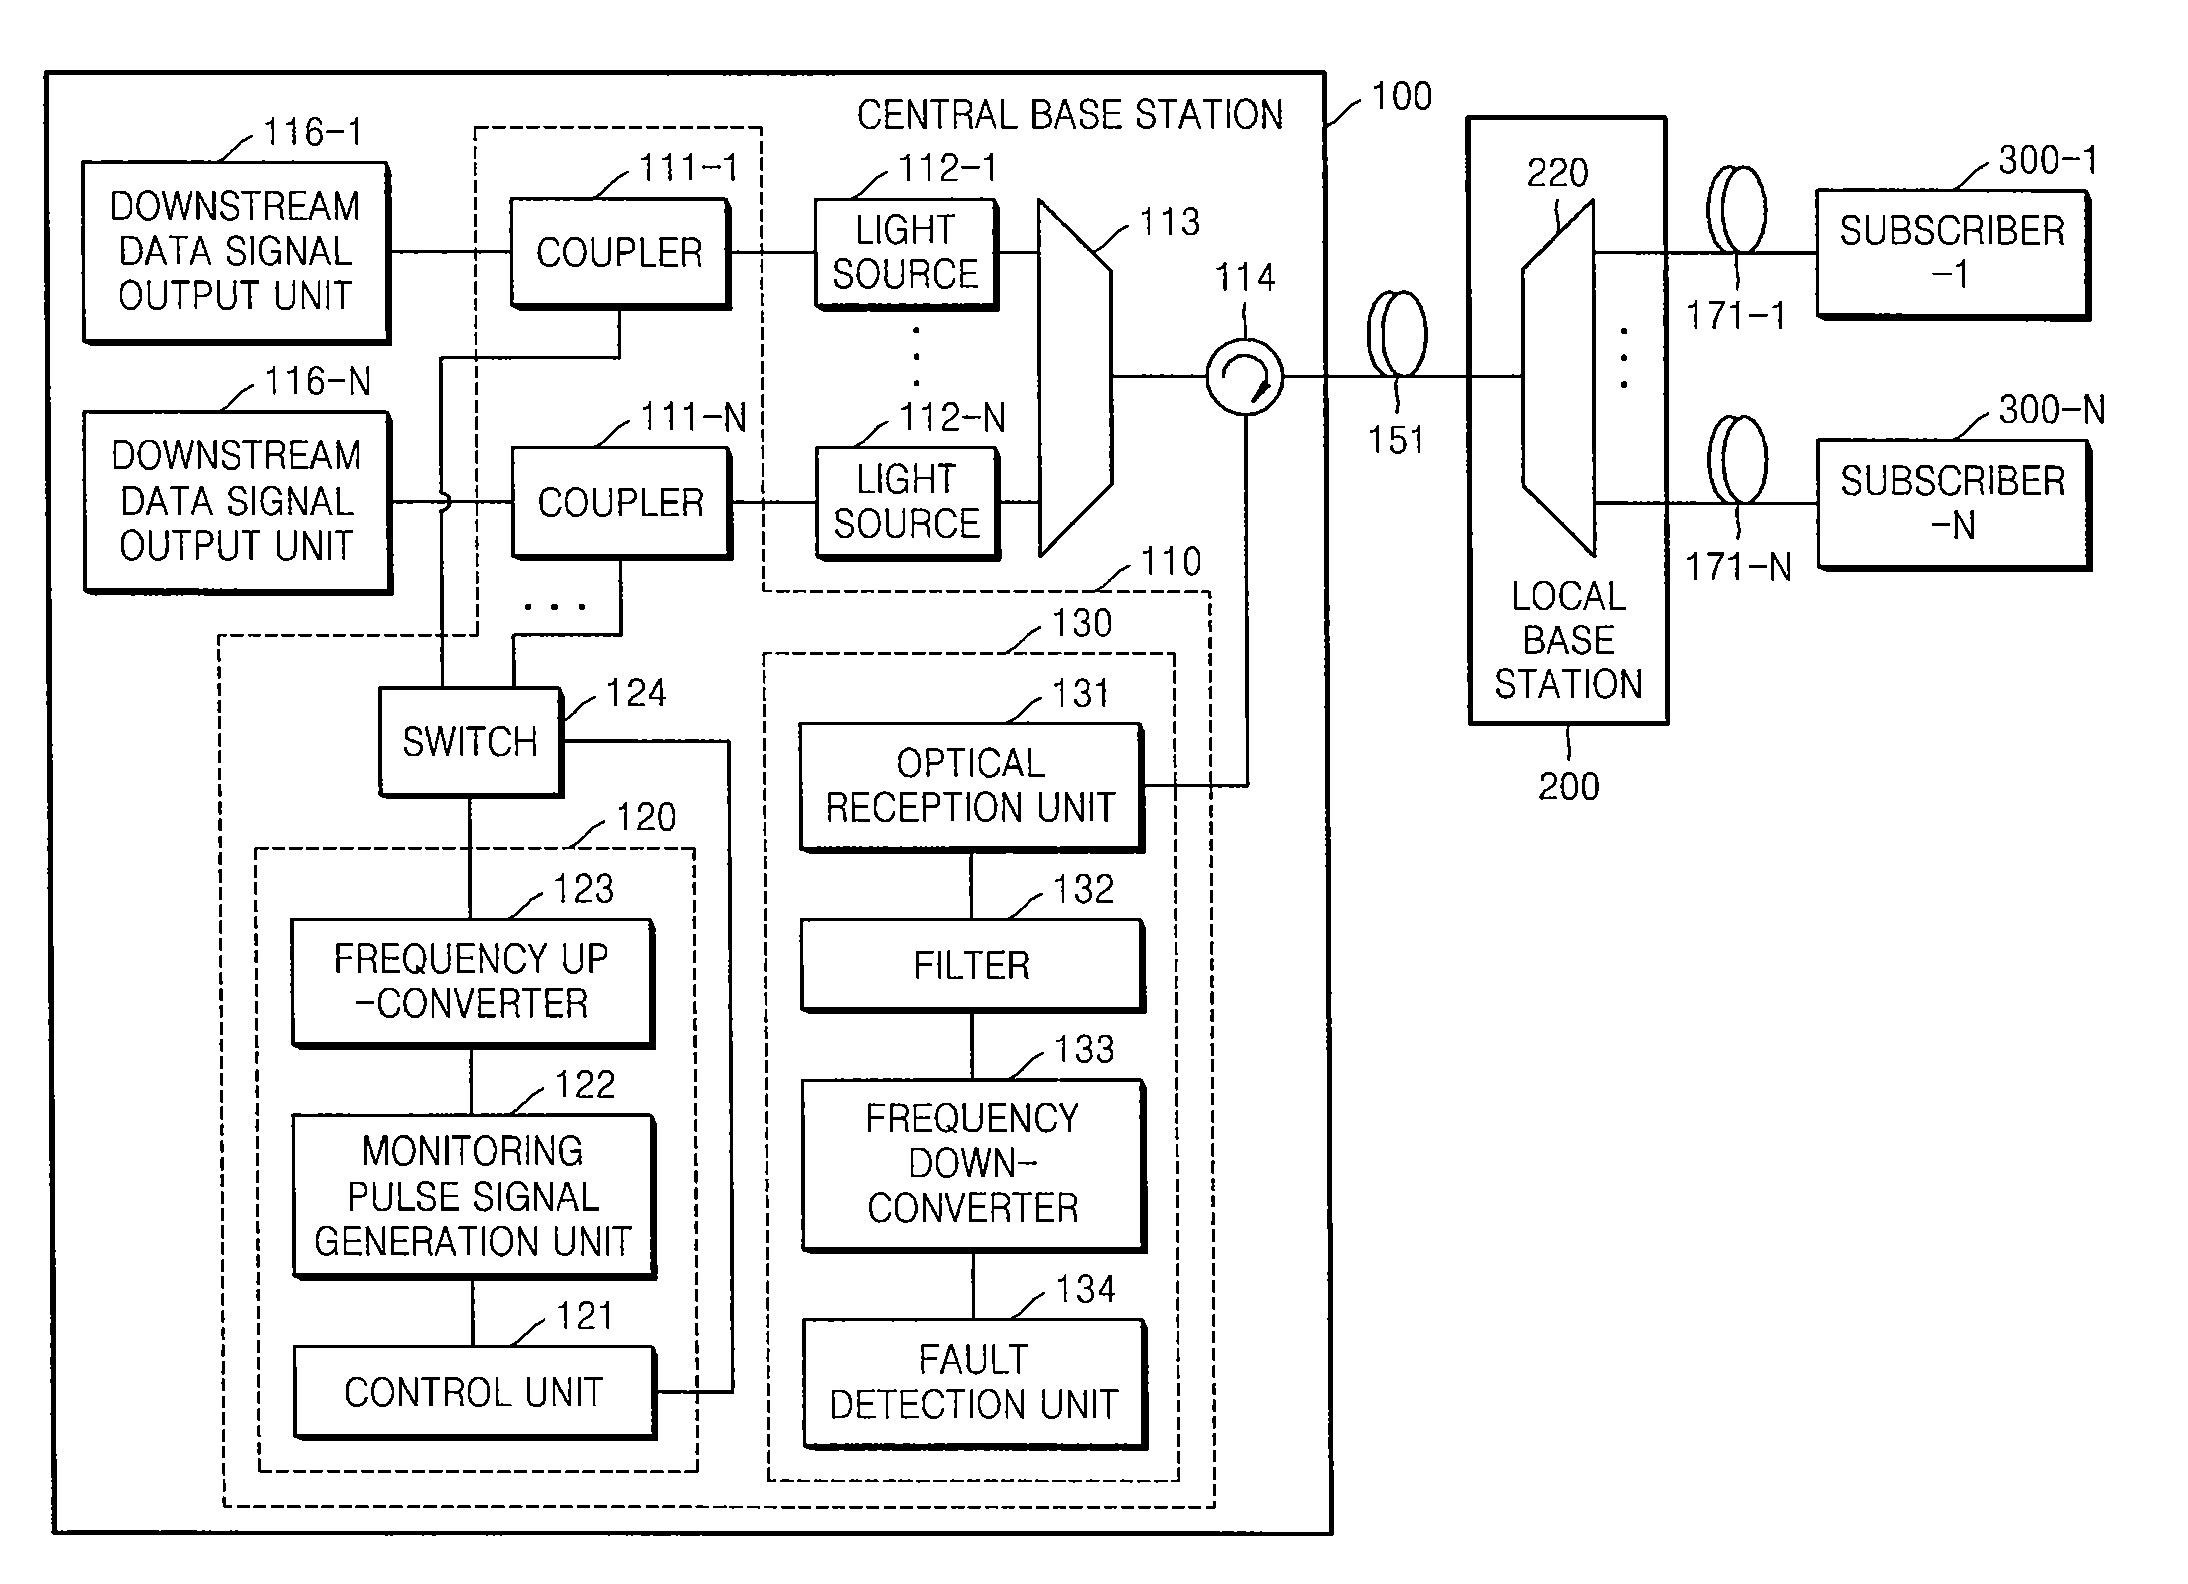 Fault localization apparatus for optical line using subcarrier multiplexing (SCM) monitoring signal and method thereof